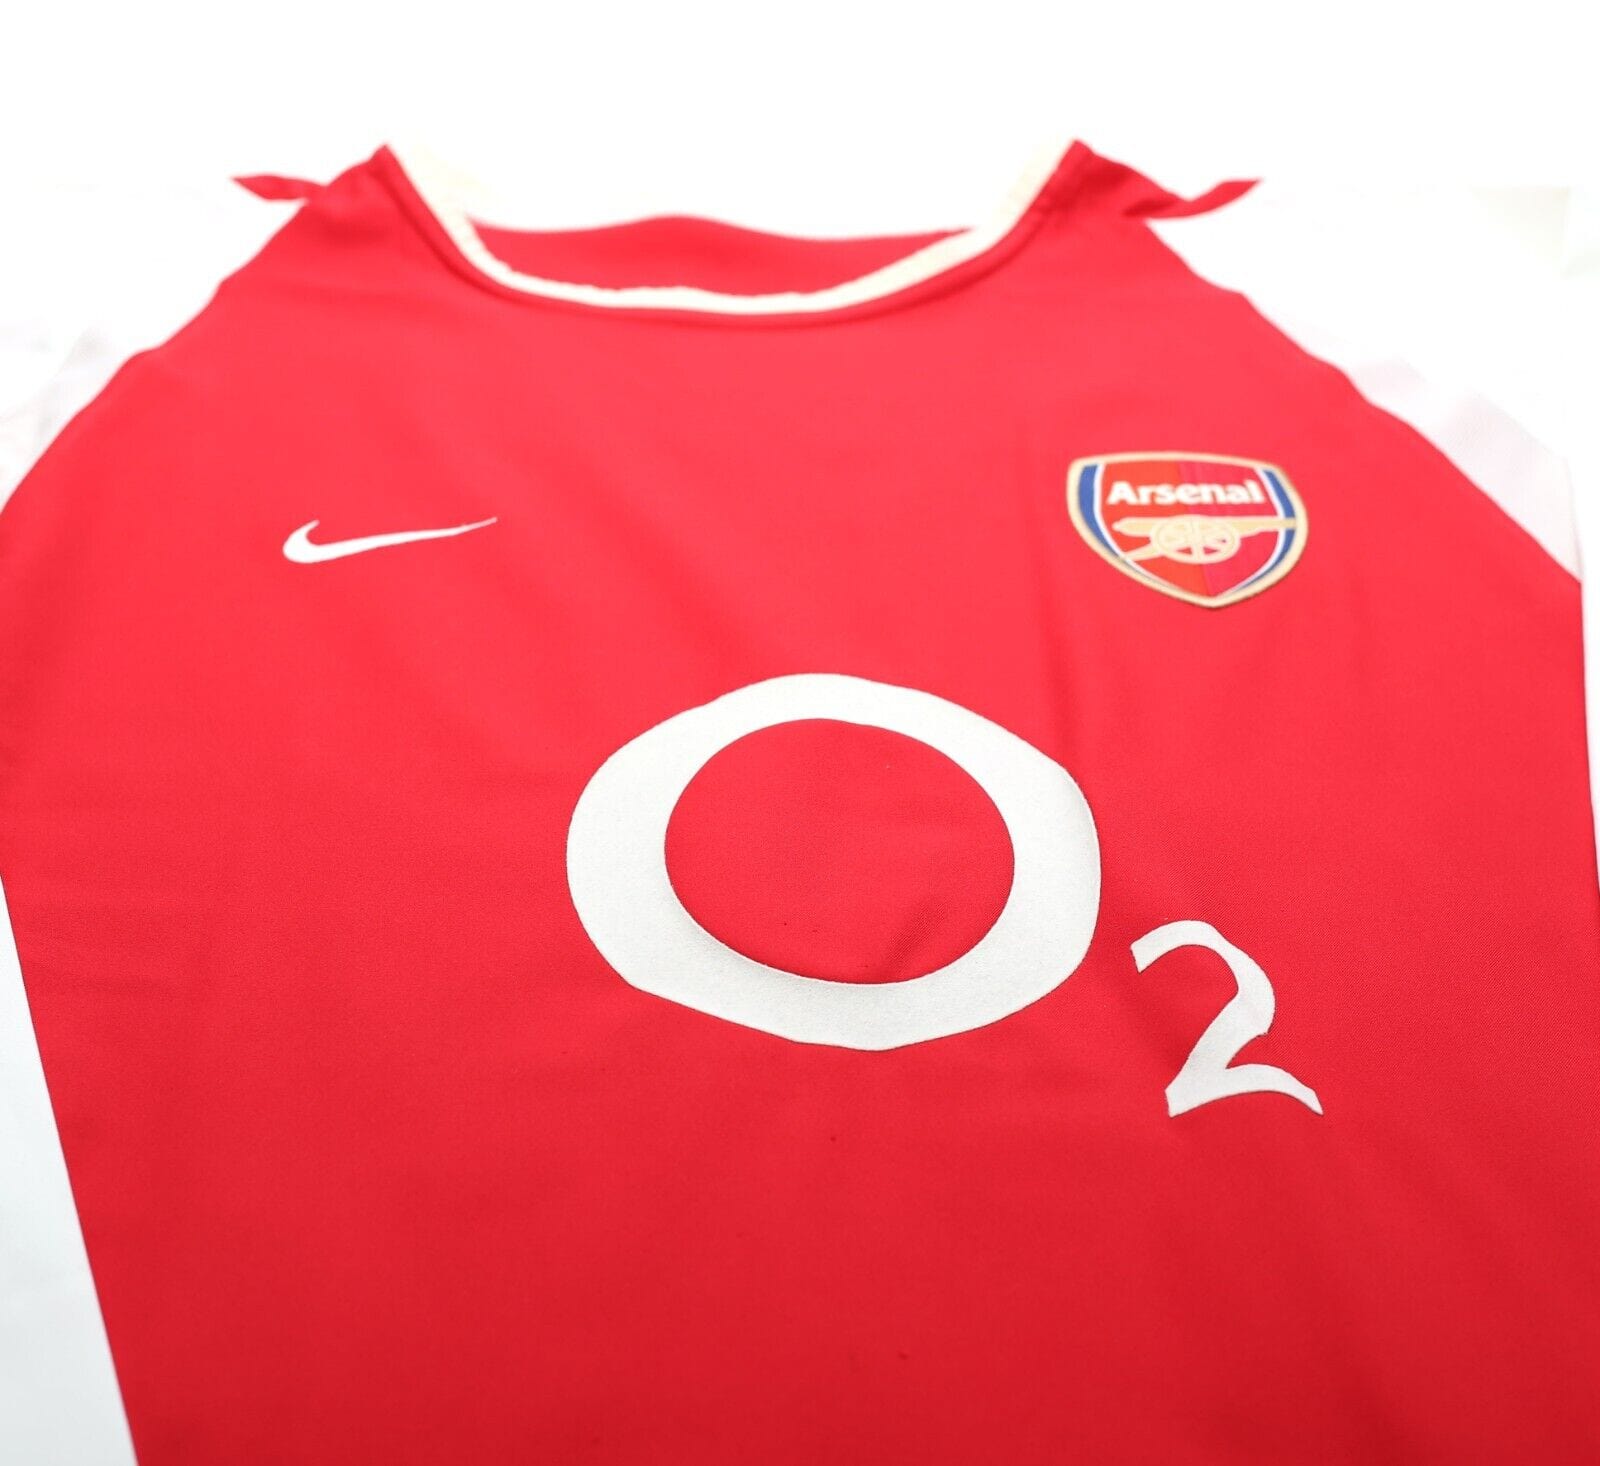 2002/04 HENRY #14 Arsenal Vintage Nike UCL Home LS Football Shirt Jersey (L)